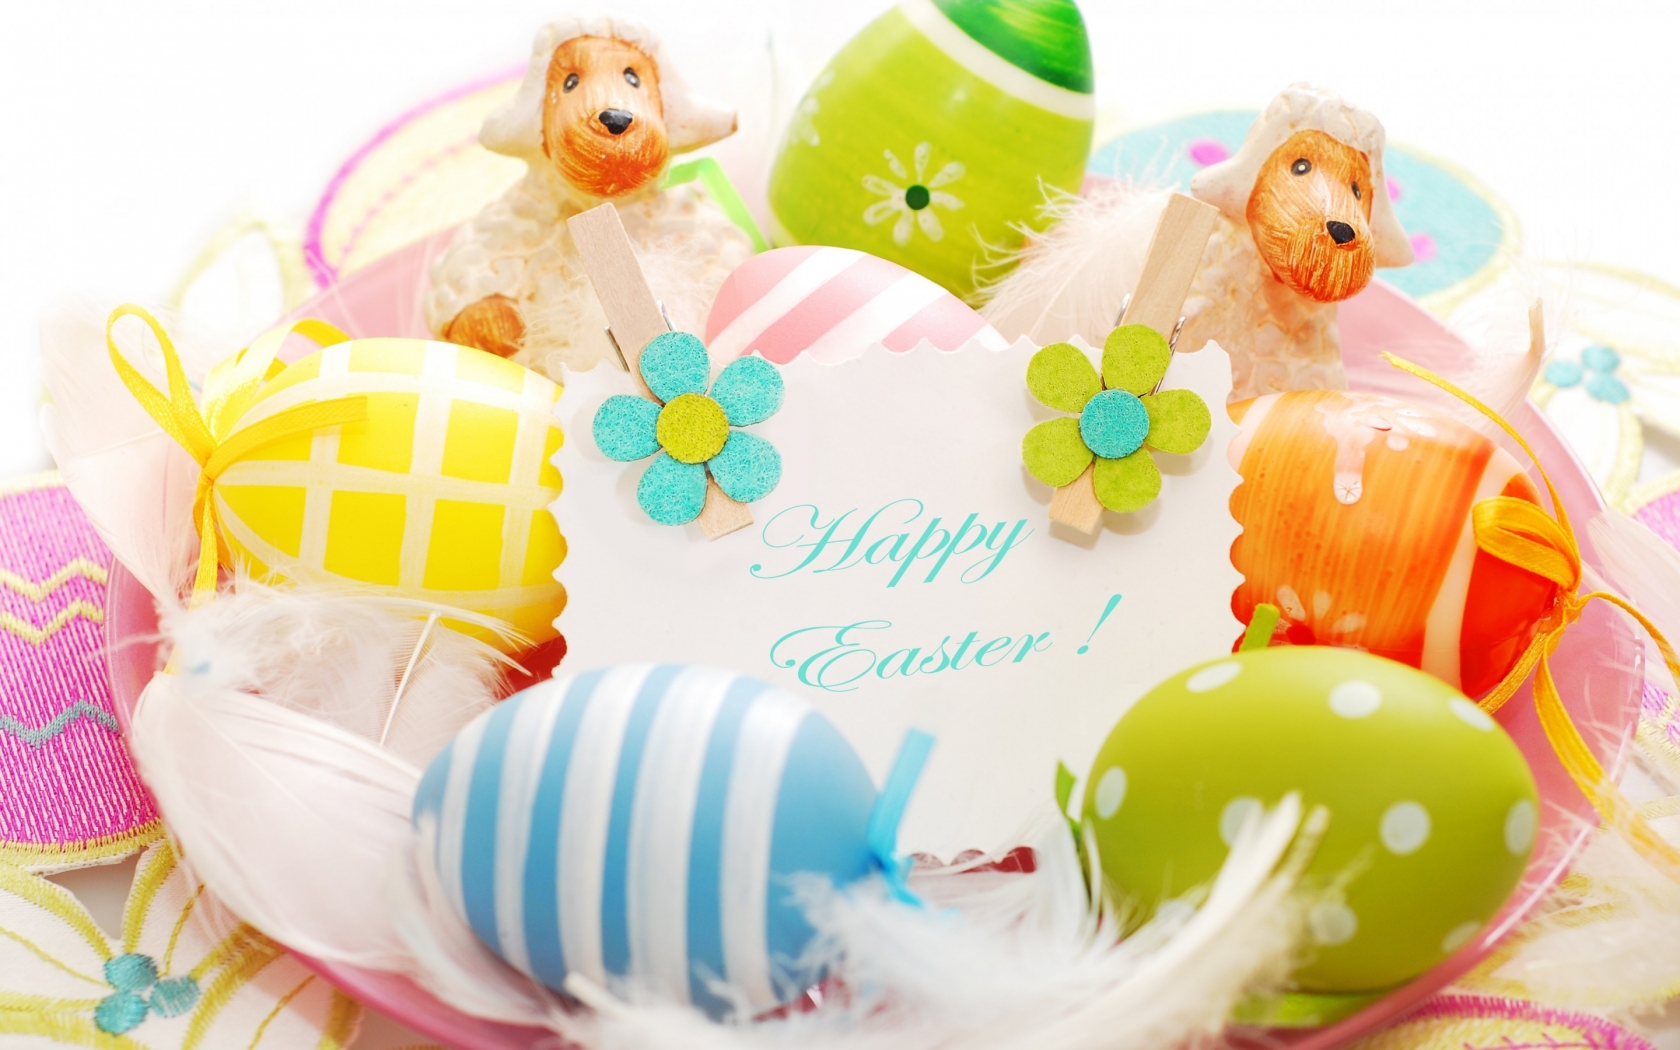 2014 Happy Easter Decorations for 1680 x 1050 widescreen resolution